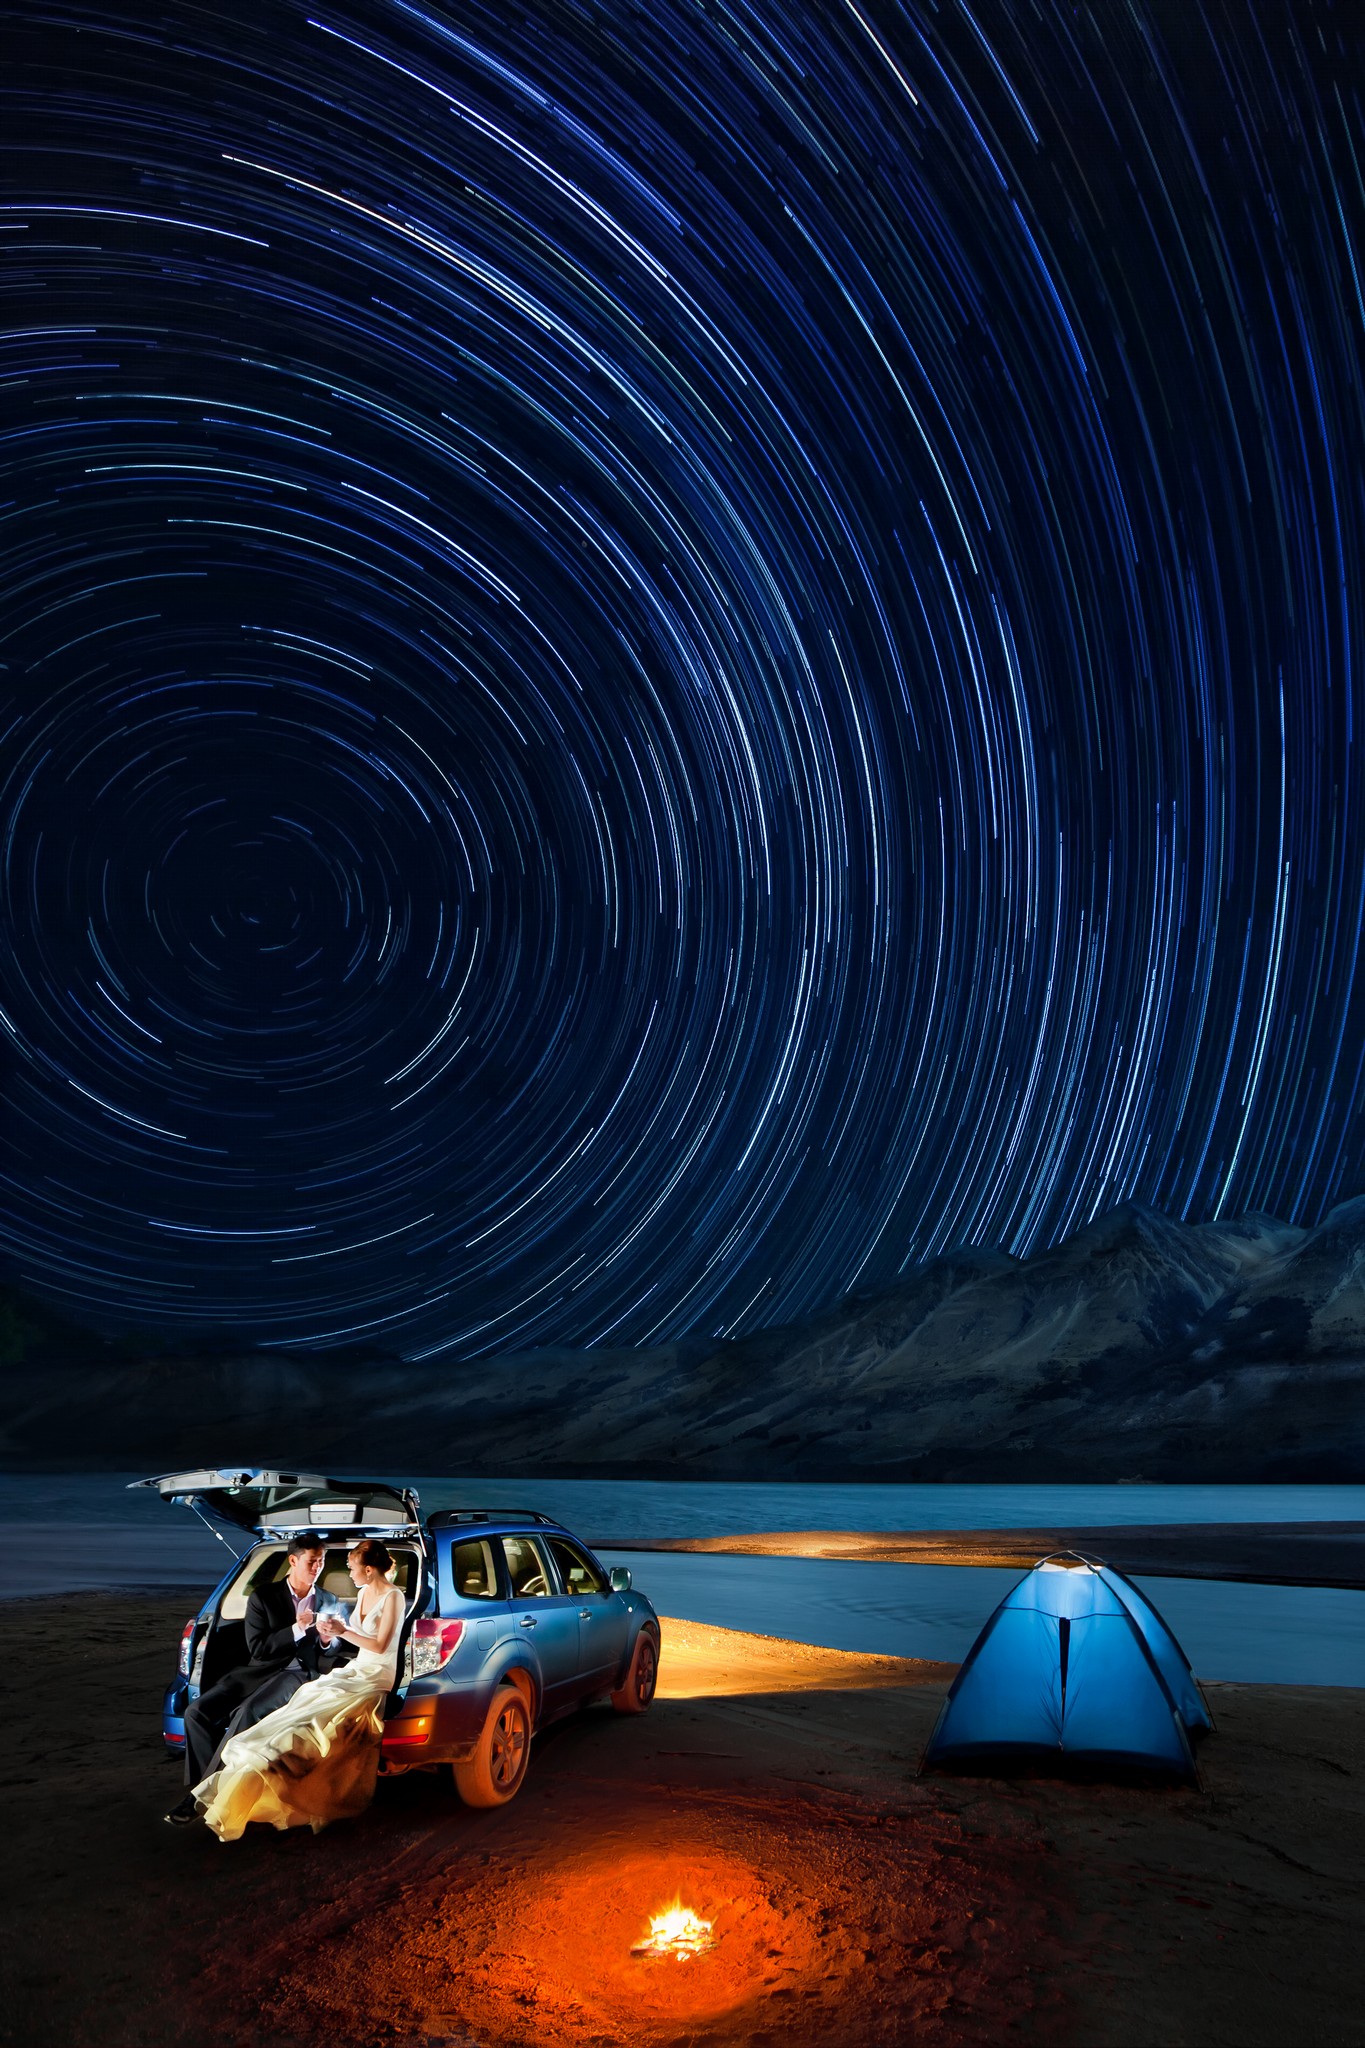 A car and tent on the beach under a starry sky, perfect for creative wedding photography.